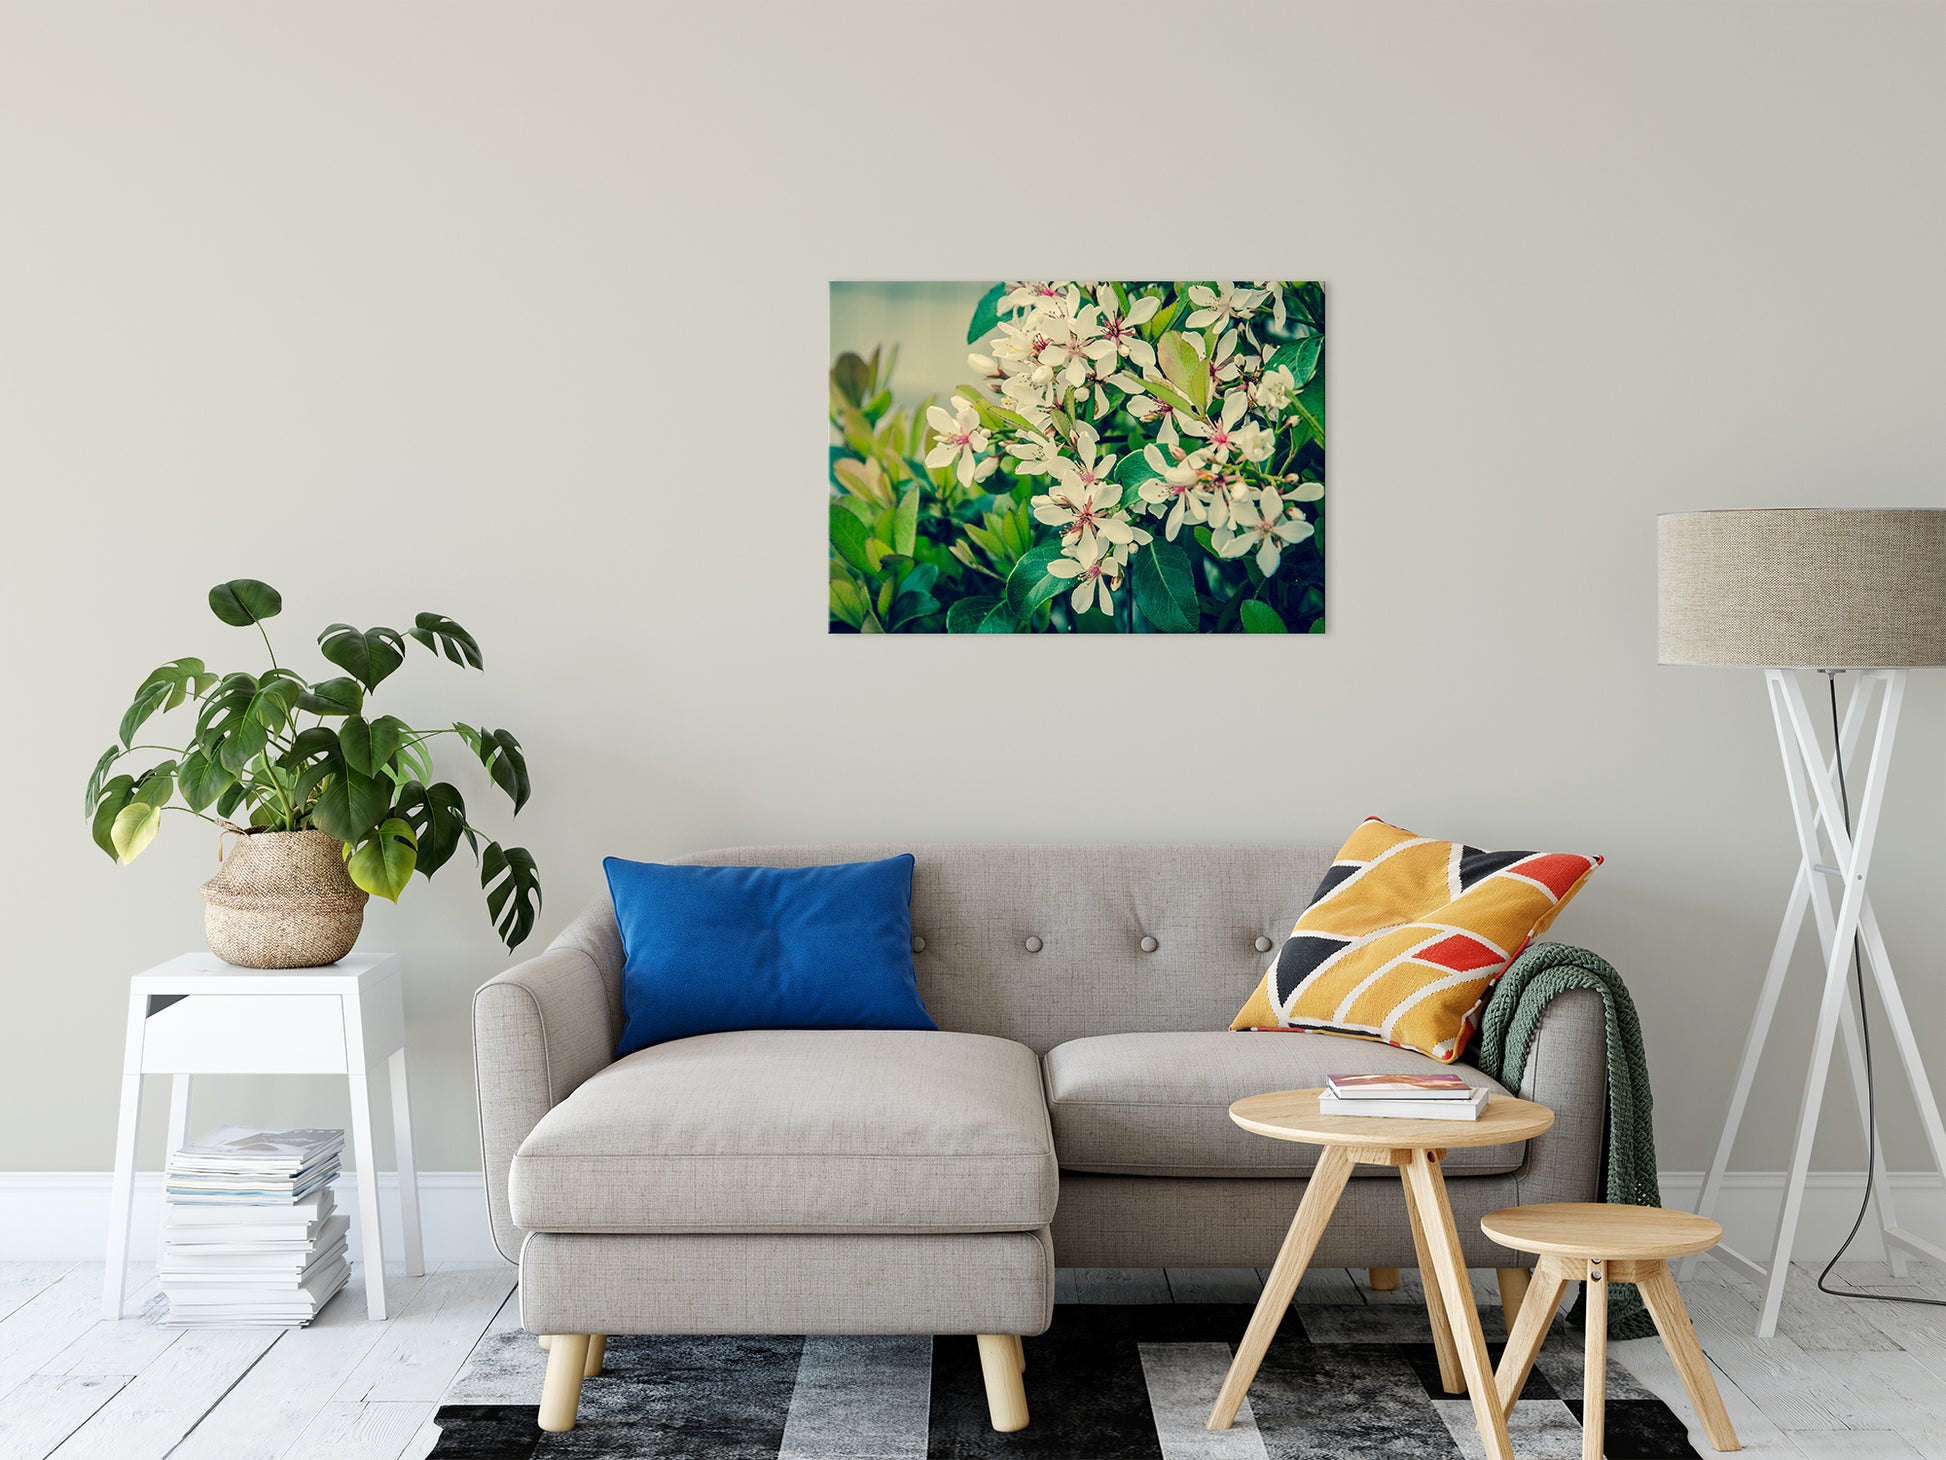 Indian Hawthorn Shrub in Bloom Colorized Floral Photo Fine Art Canvas Wall Art Prints 24" x 36" - PIPAFINEART